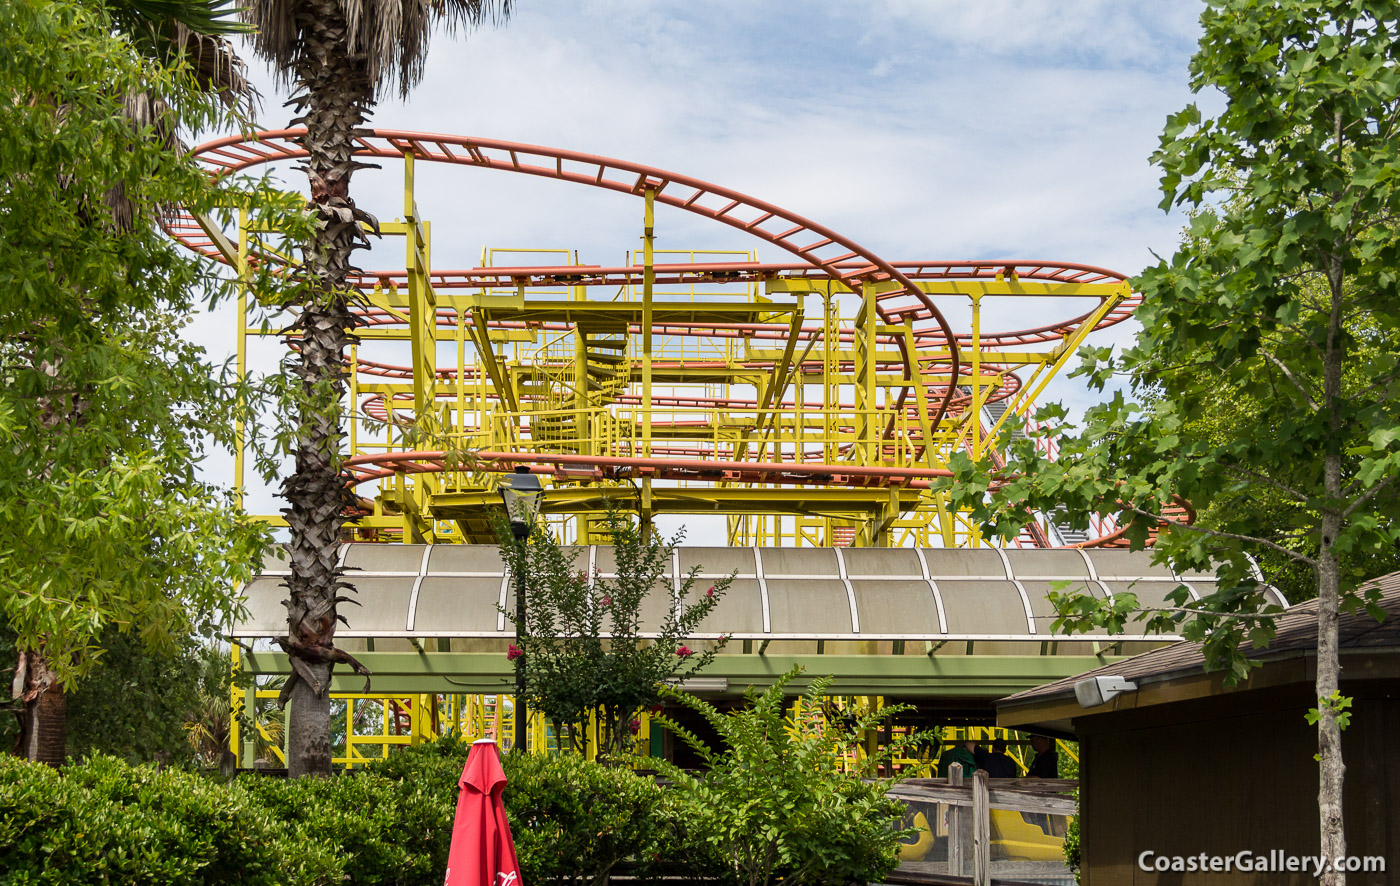 Track layout of the Wild Mouse roller coaster in Valdosta, Georgia